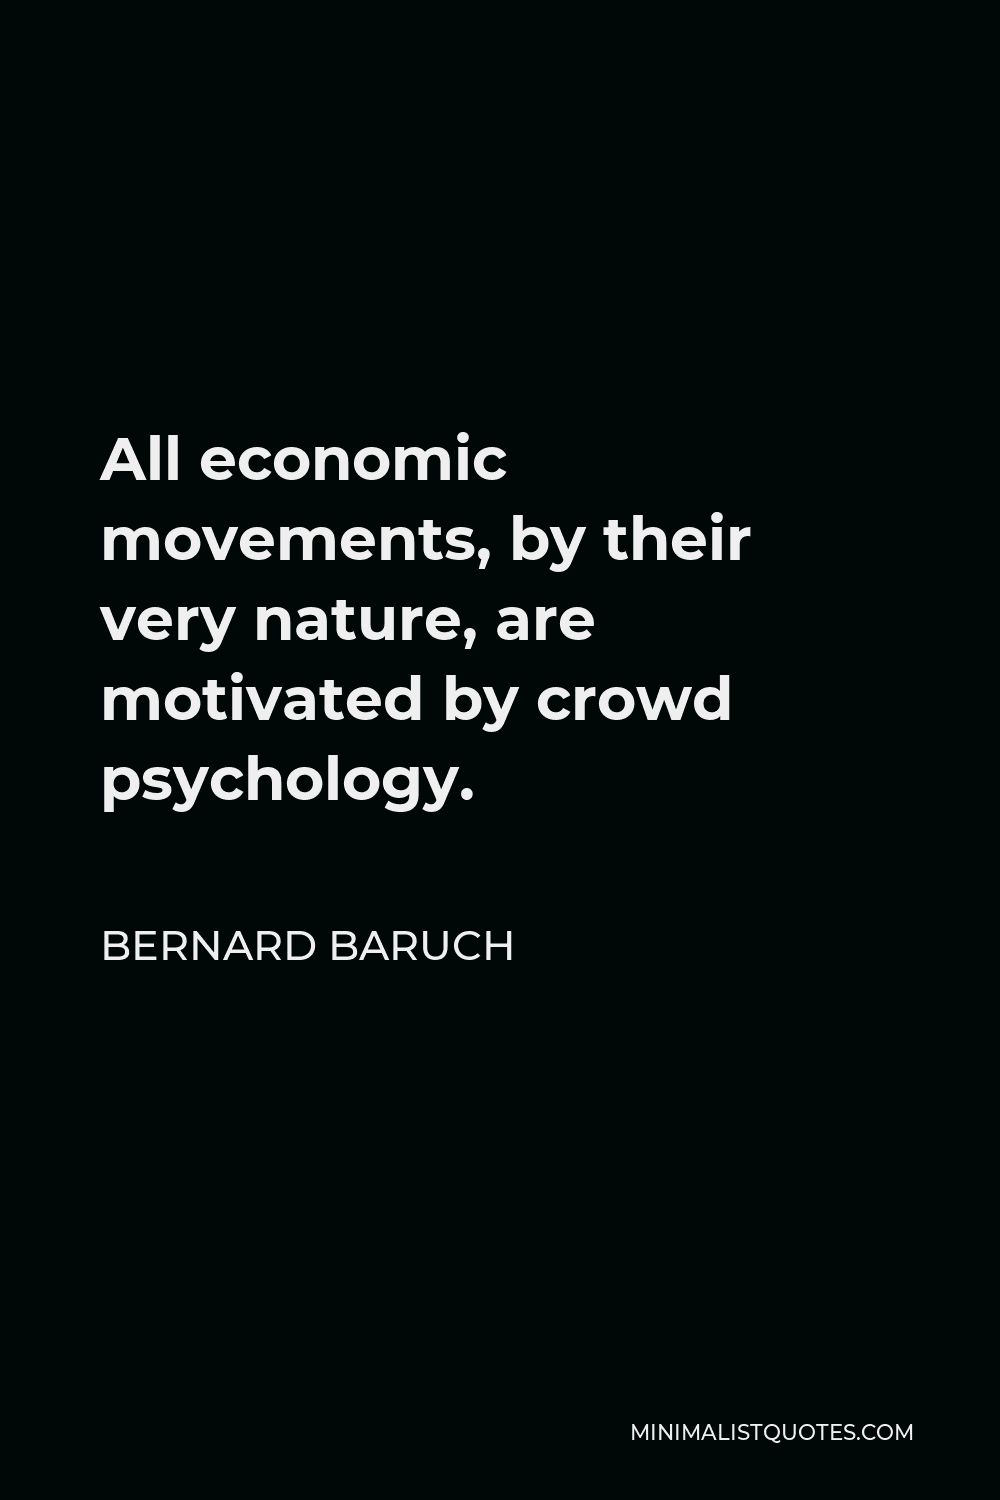 Bernard Baruch Quote - All economic movements, by their very nature, are motivated by crowd psychology.